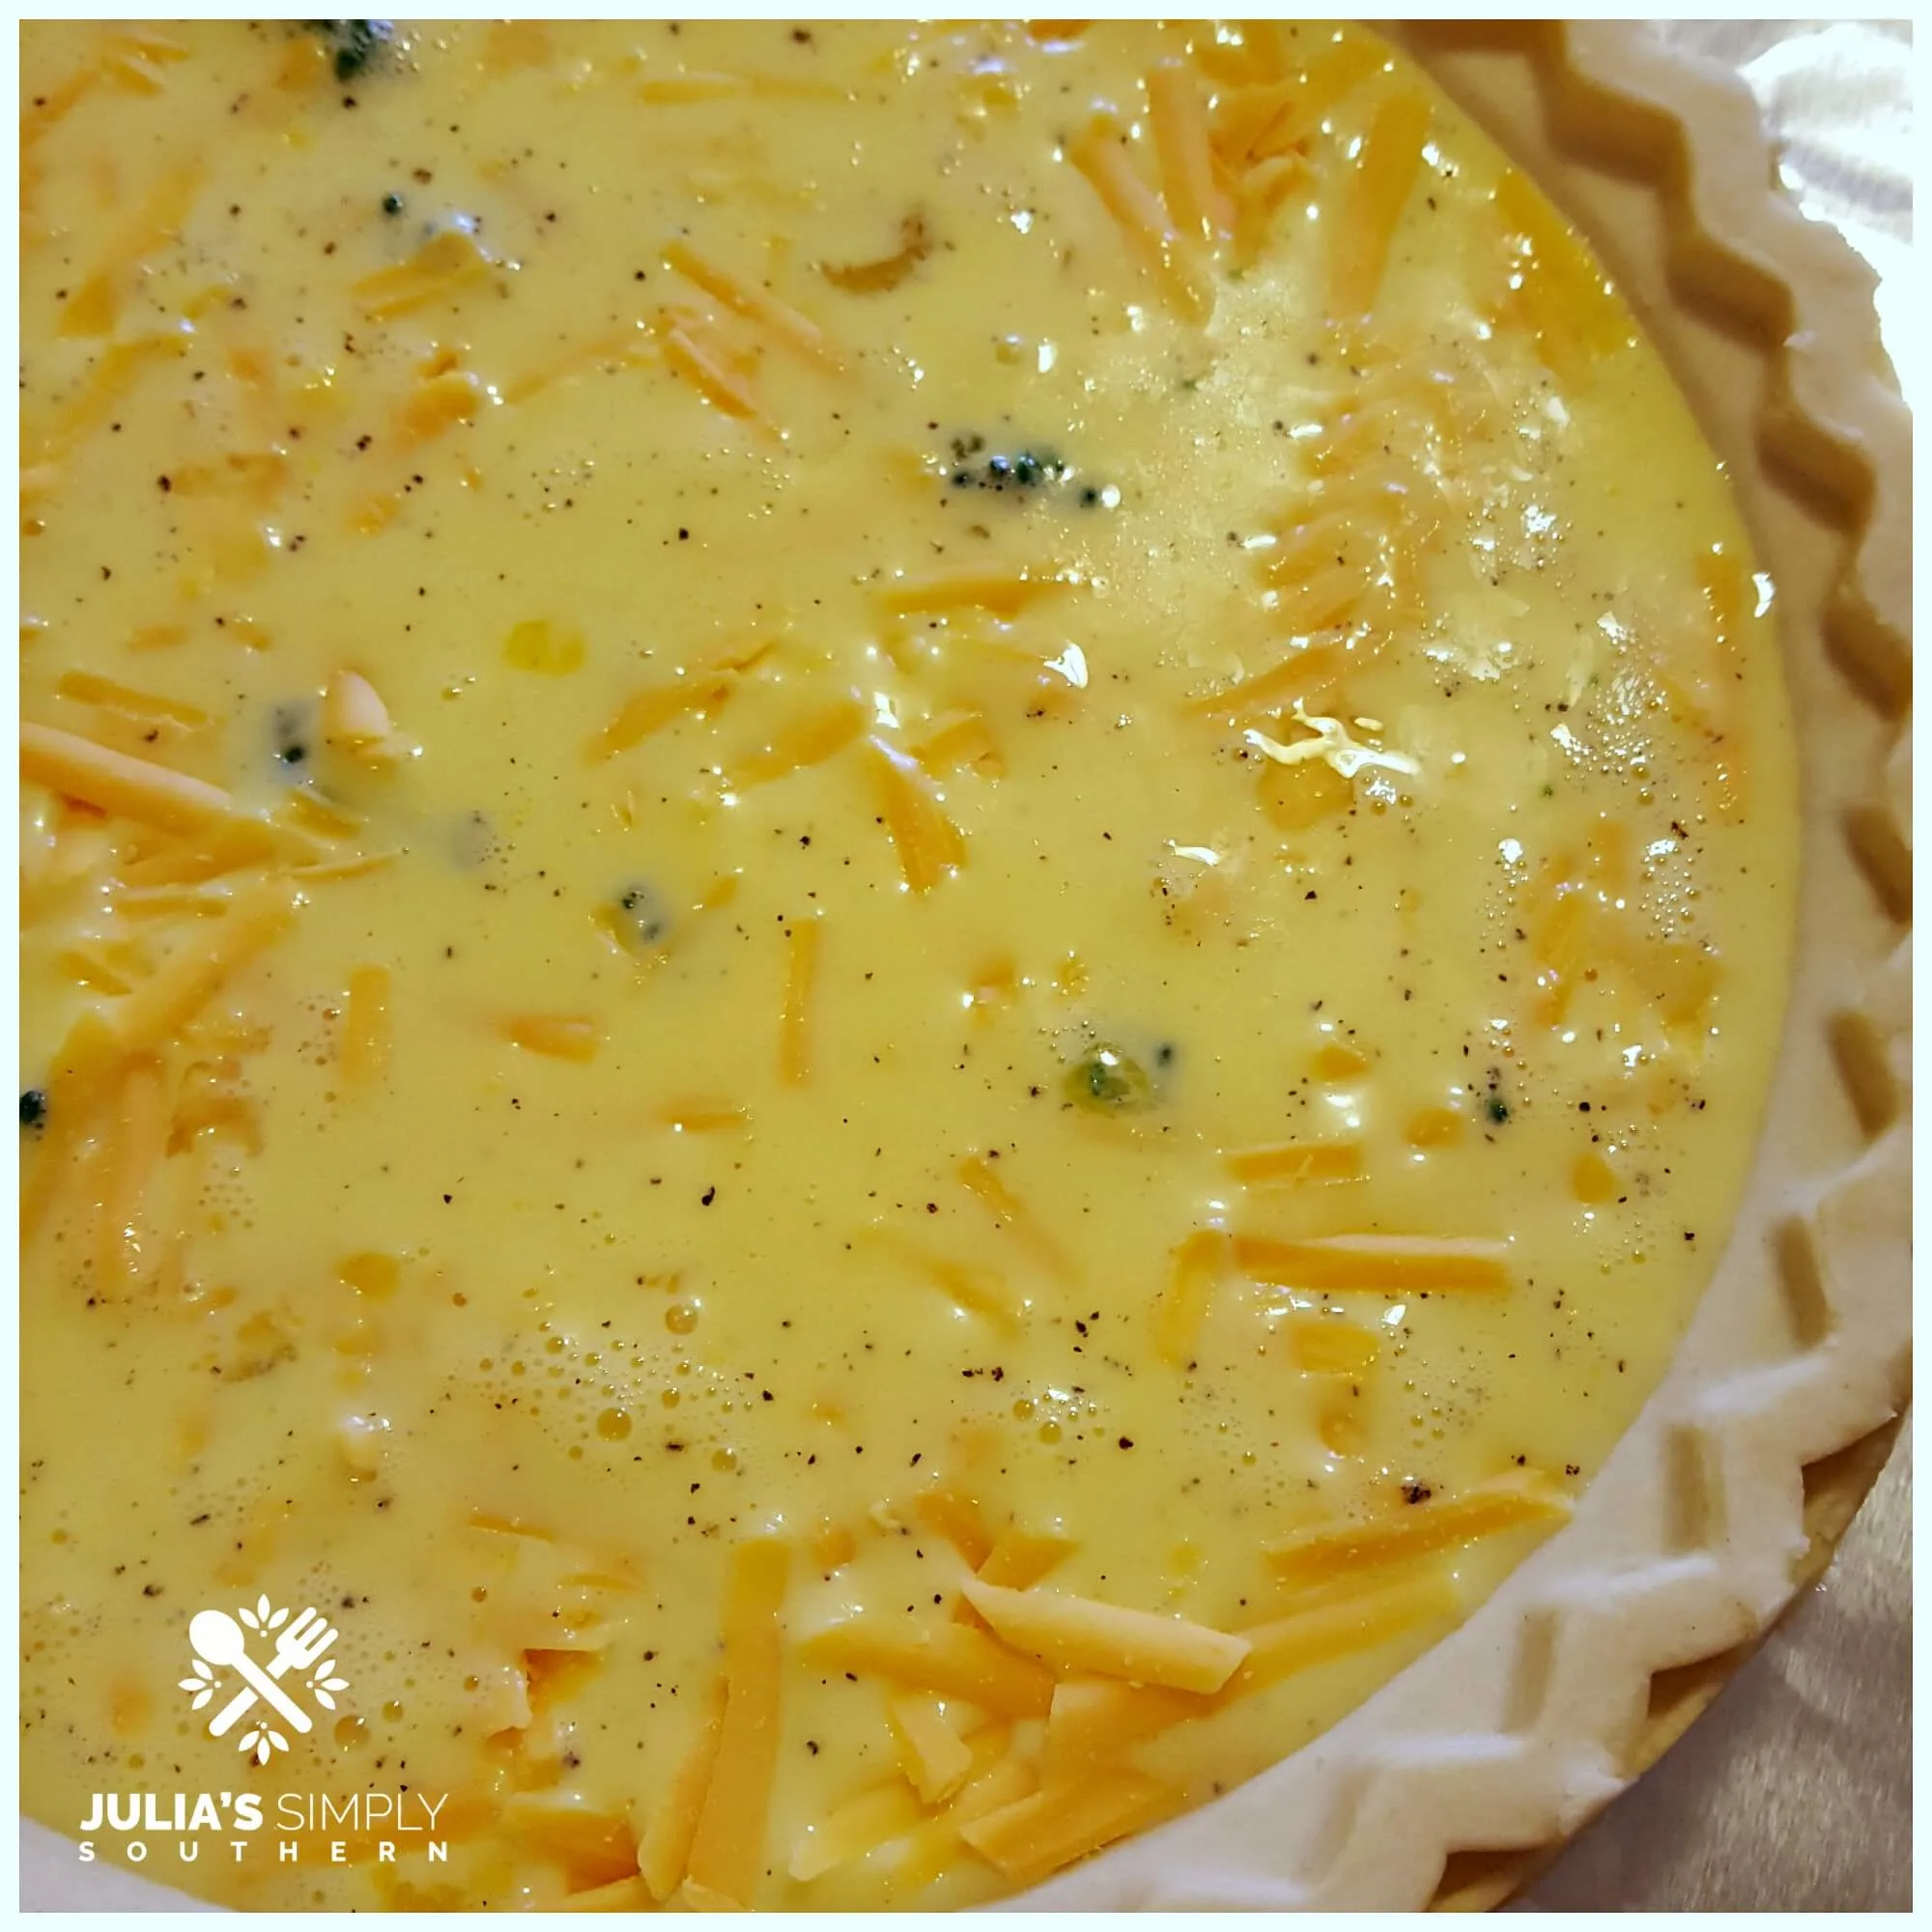 How to make a healthy broccoli and cheddar cheese quiche